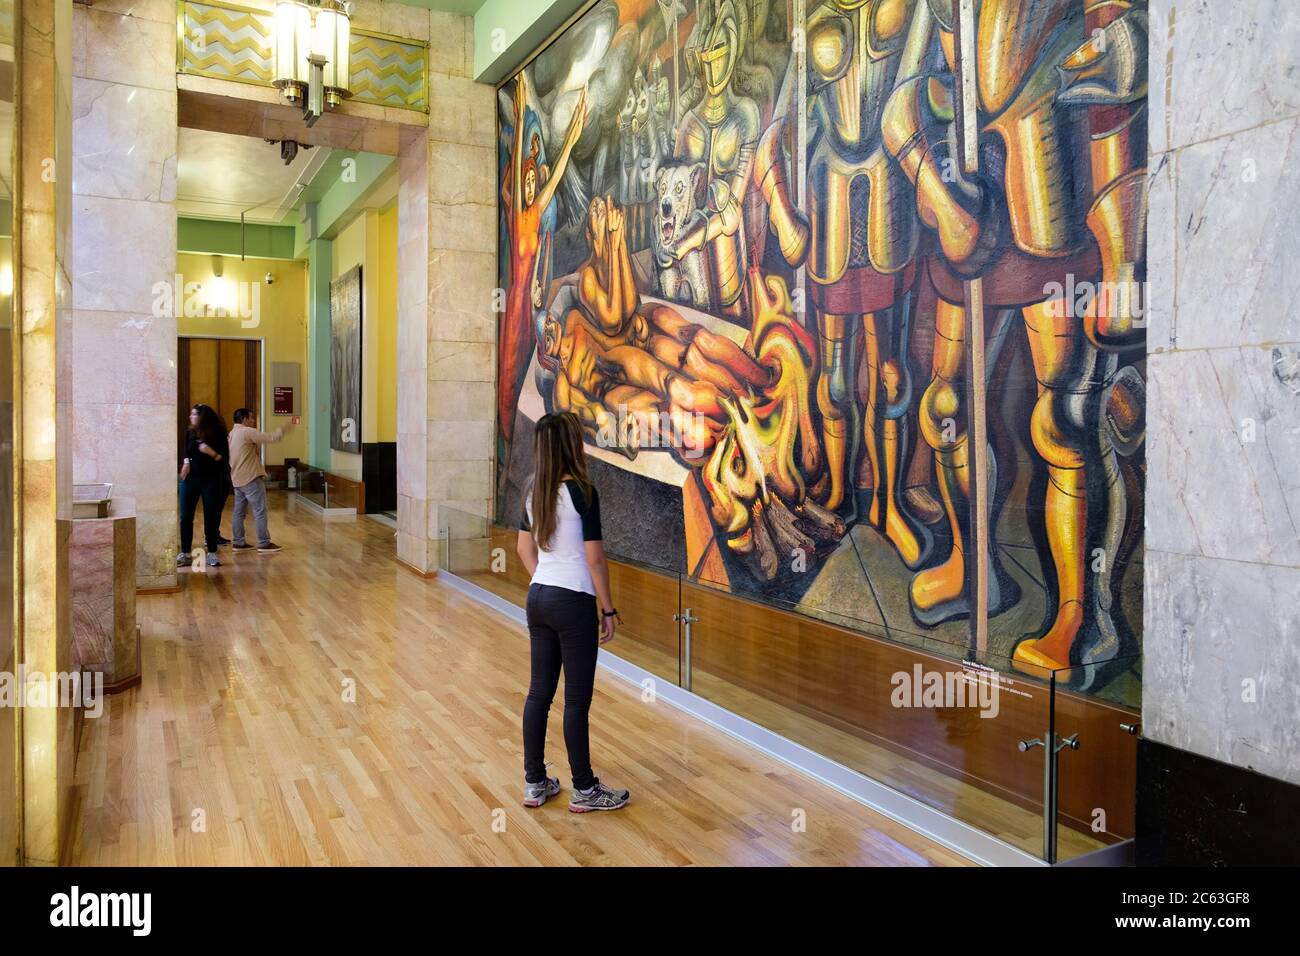 Visitor admiring a famous mural painting by David Alfaro Siqueiros at the museum of Palacio de Bellas Artes in Mexico City Stock Photo